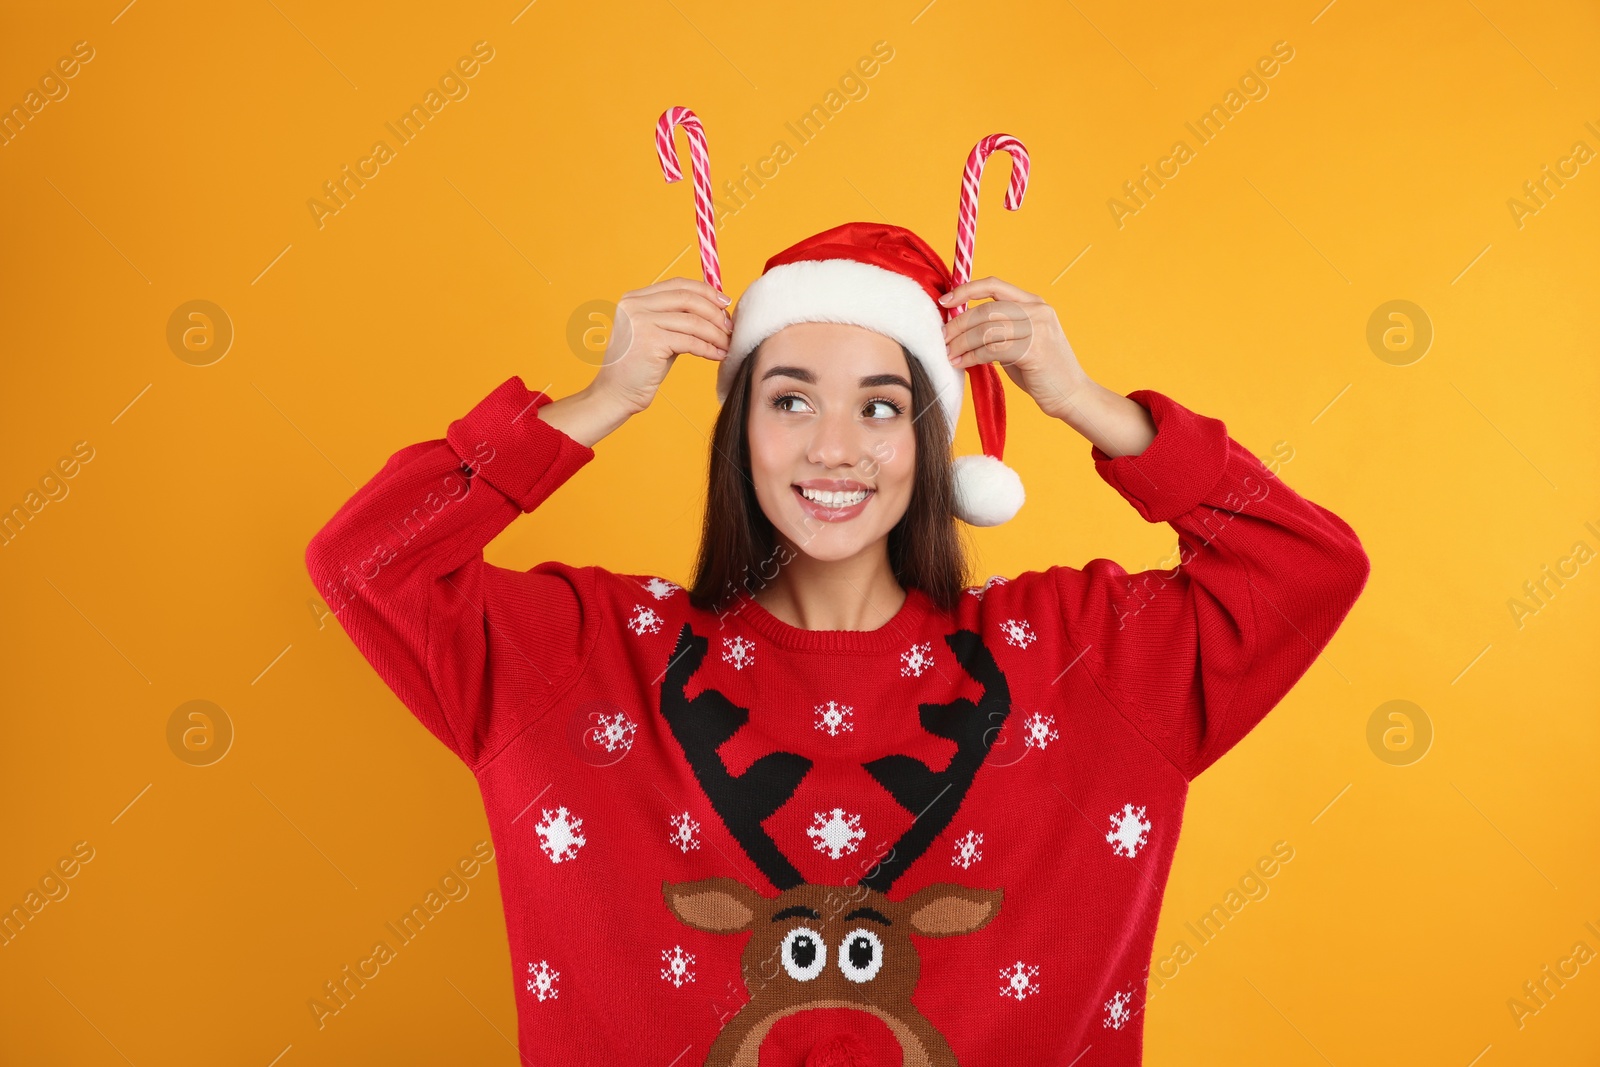 Photo of Young woman in Christmas sweater and Santa hat holding candy canes on yellow background